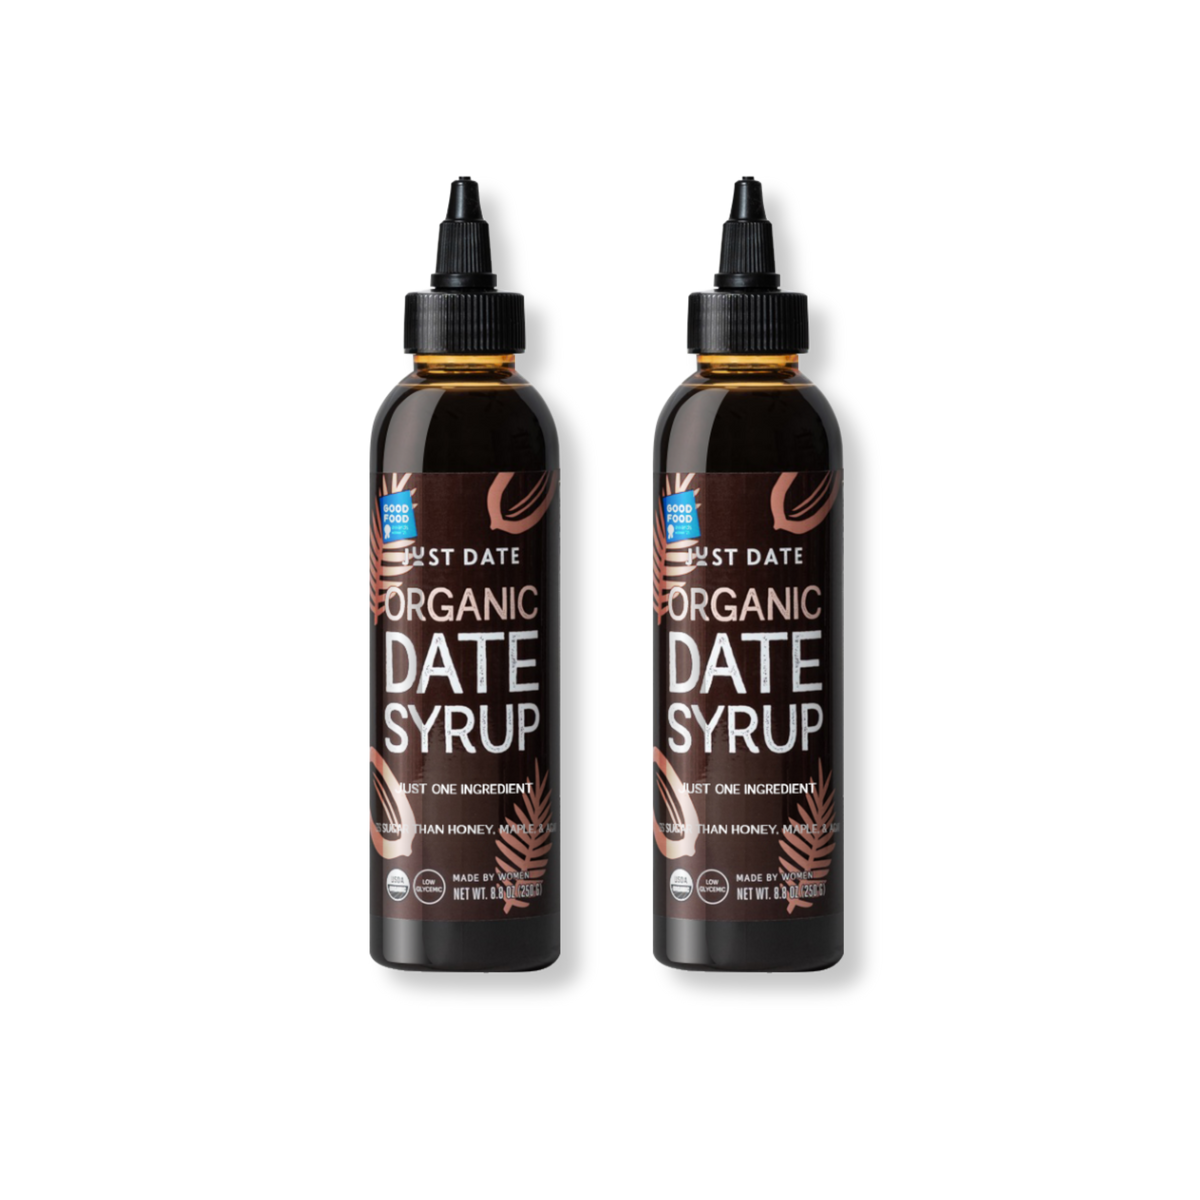 Just Date Syrup